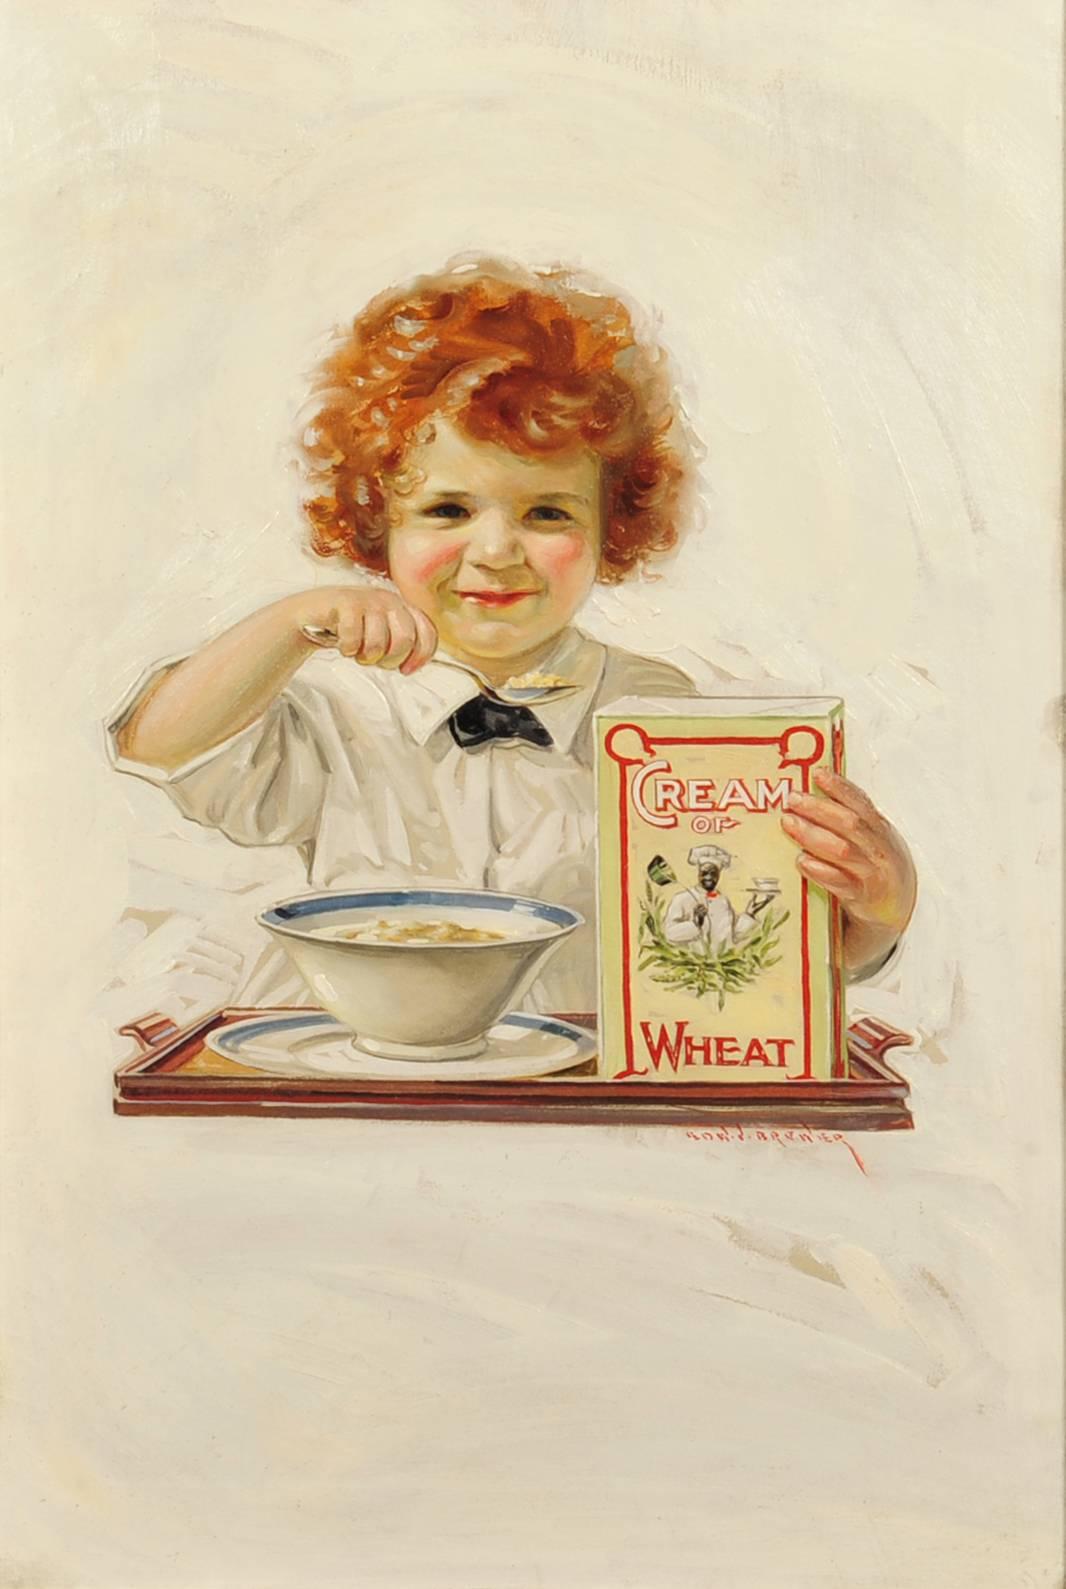 Edward Brewer Figurative Painting - "Little Indian Sioux" Cream of Wheat Ad, Saturday Evening Post, 1920